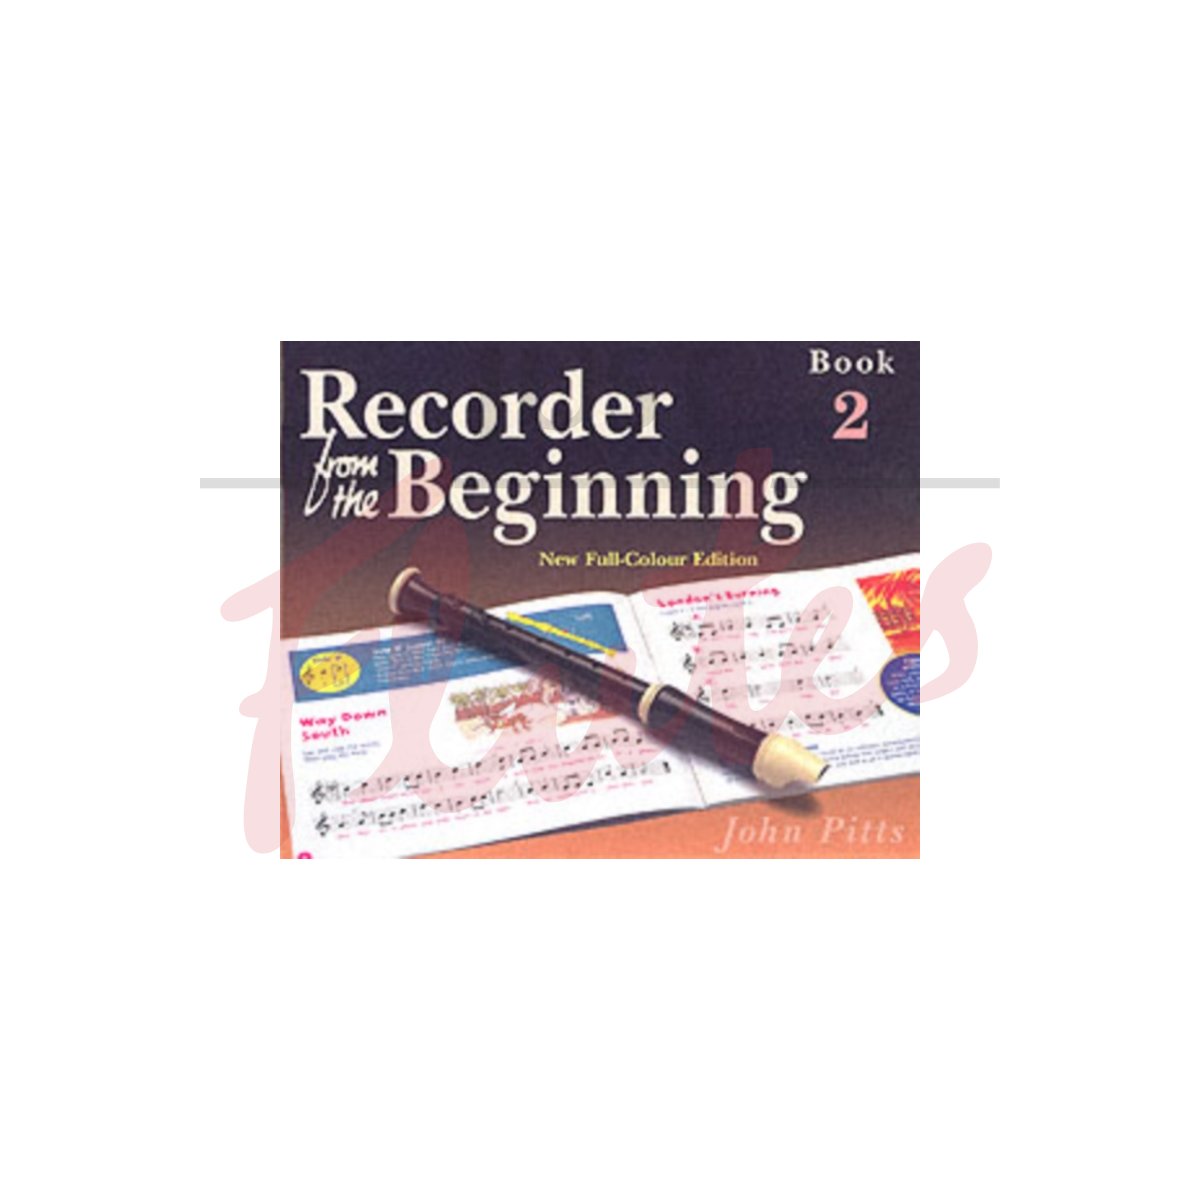 Recorder from the Beginning Book 2 (Colour Edition) [Pupil's Book]